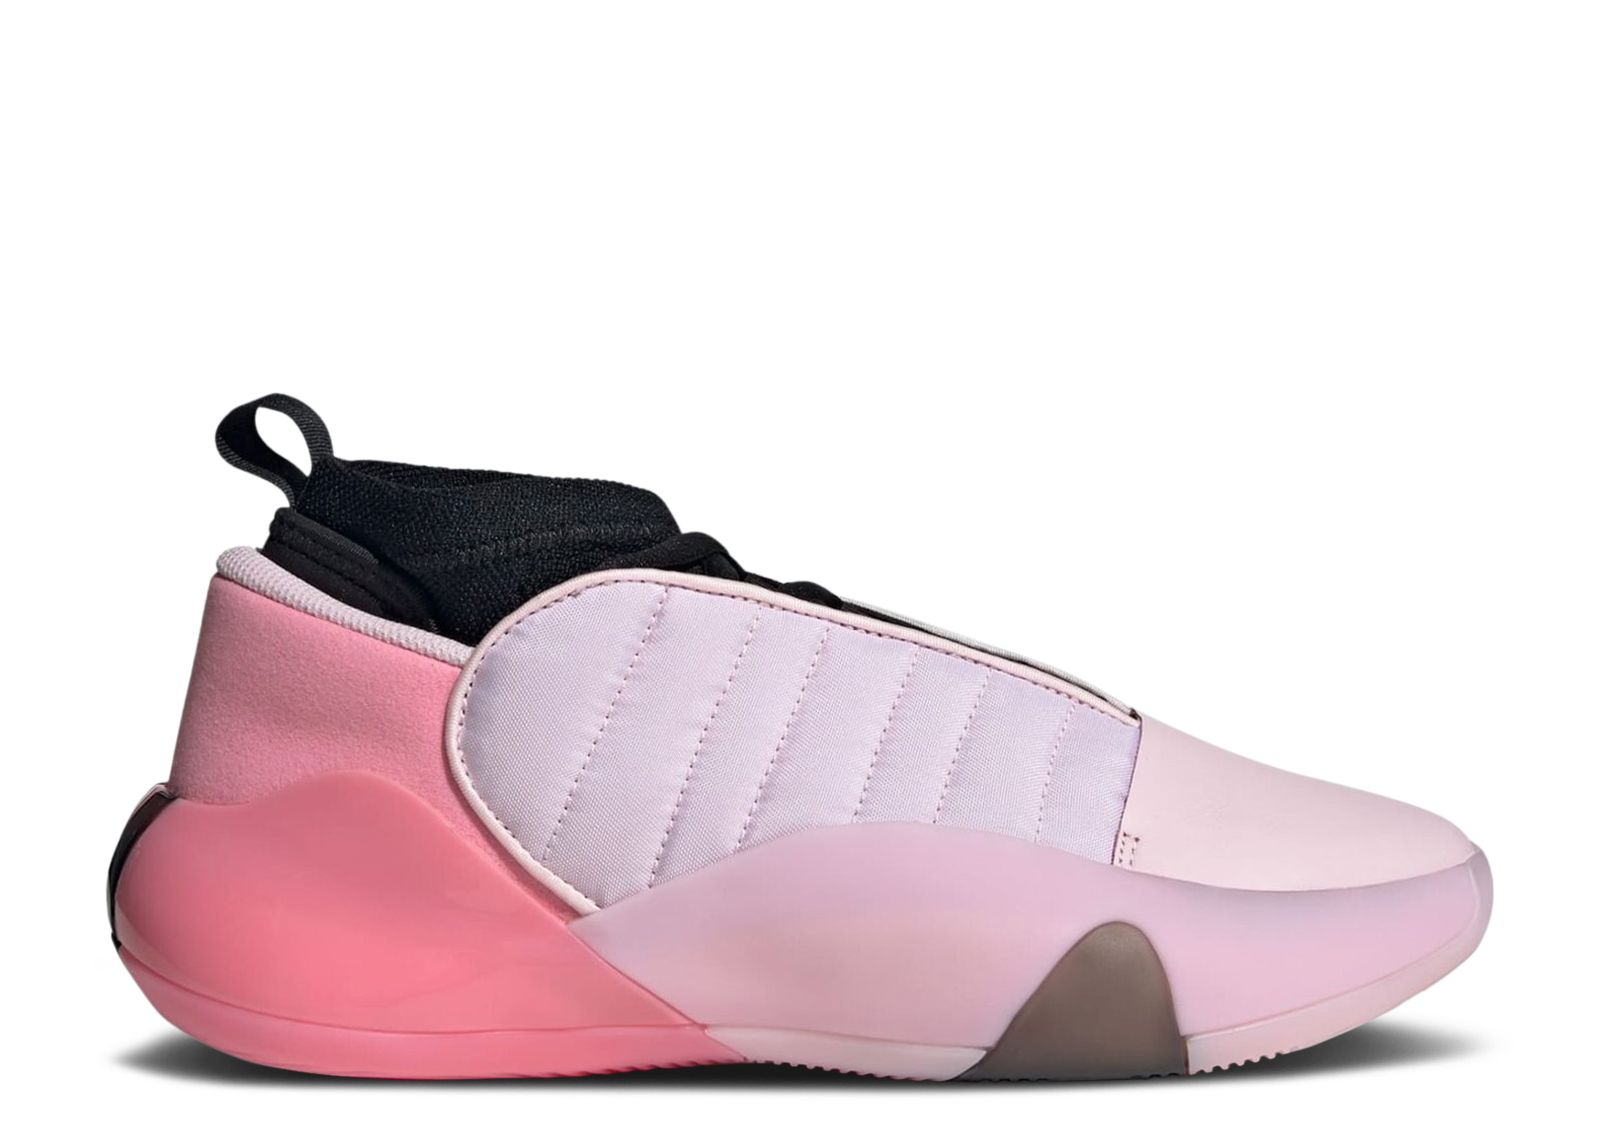 Harden Vol. 7 'Bliss Pink' - Adidas - IH7707 - clear pink/core black/bliss  pink